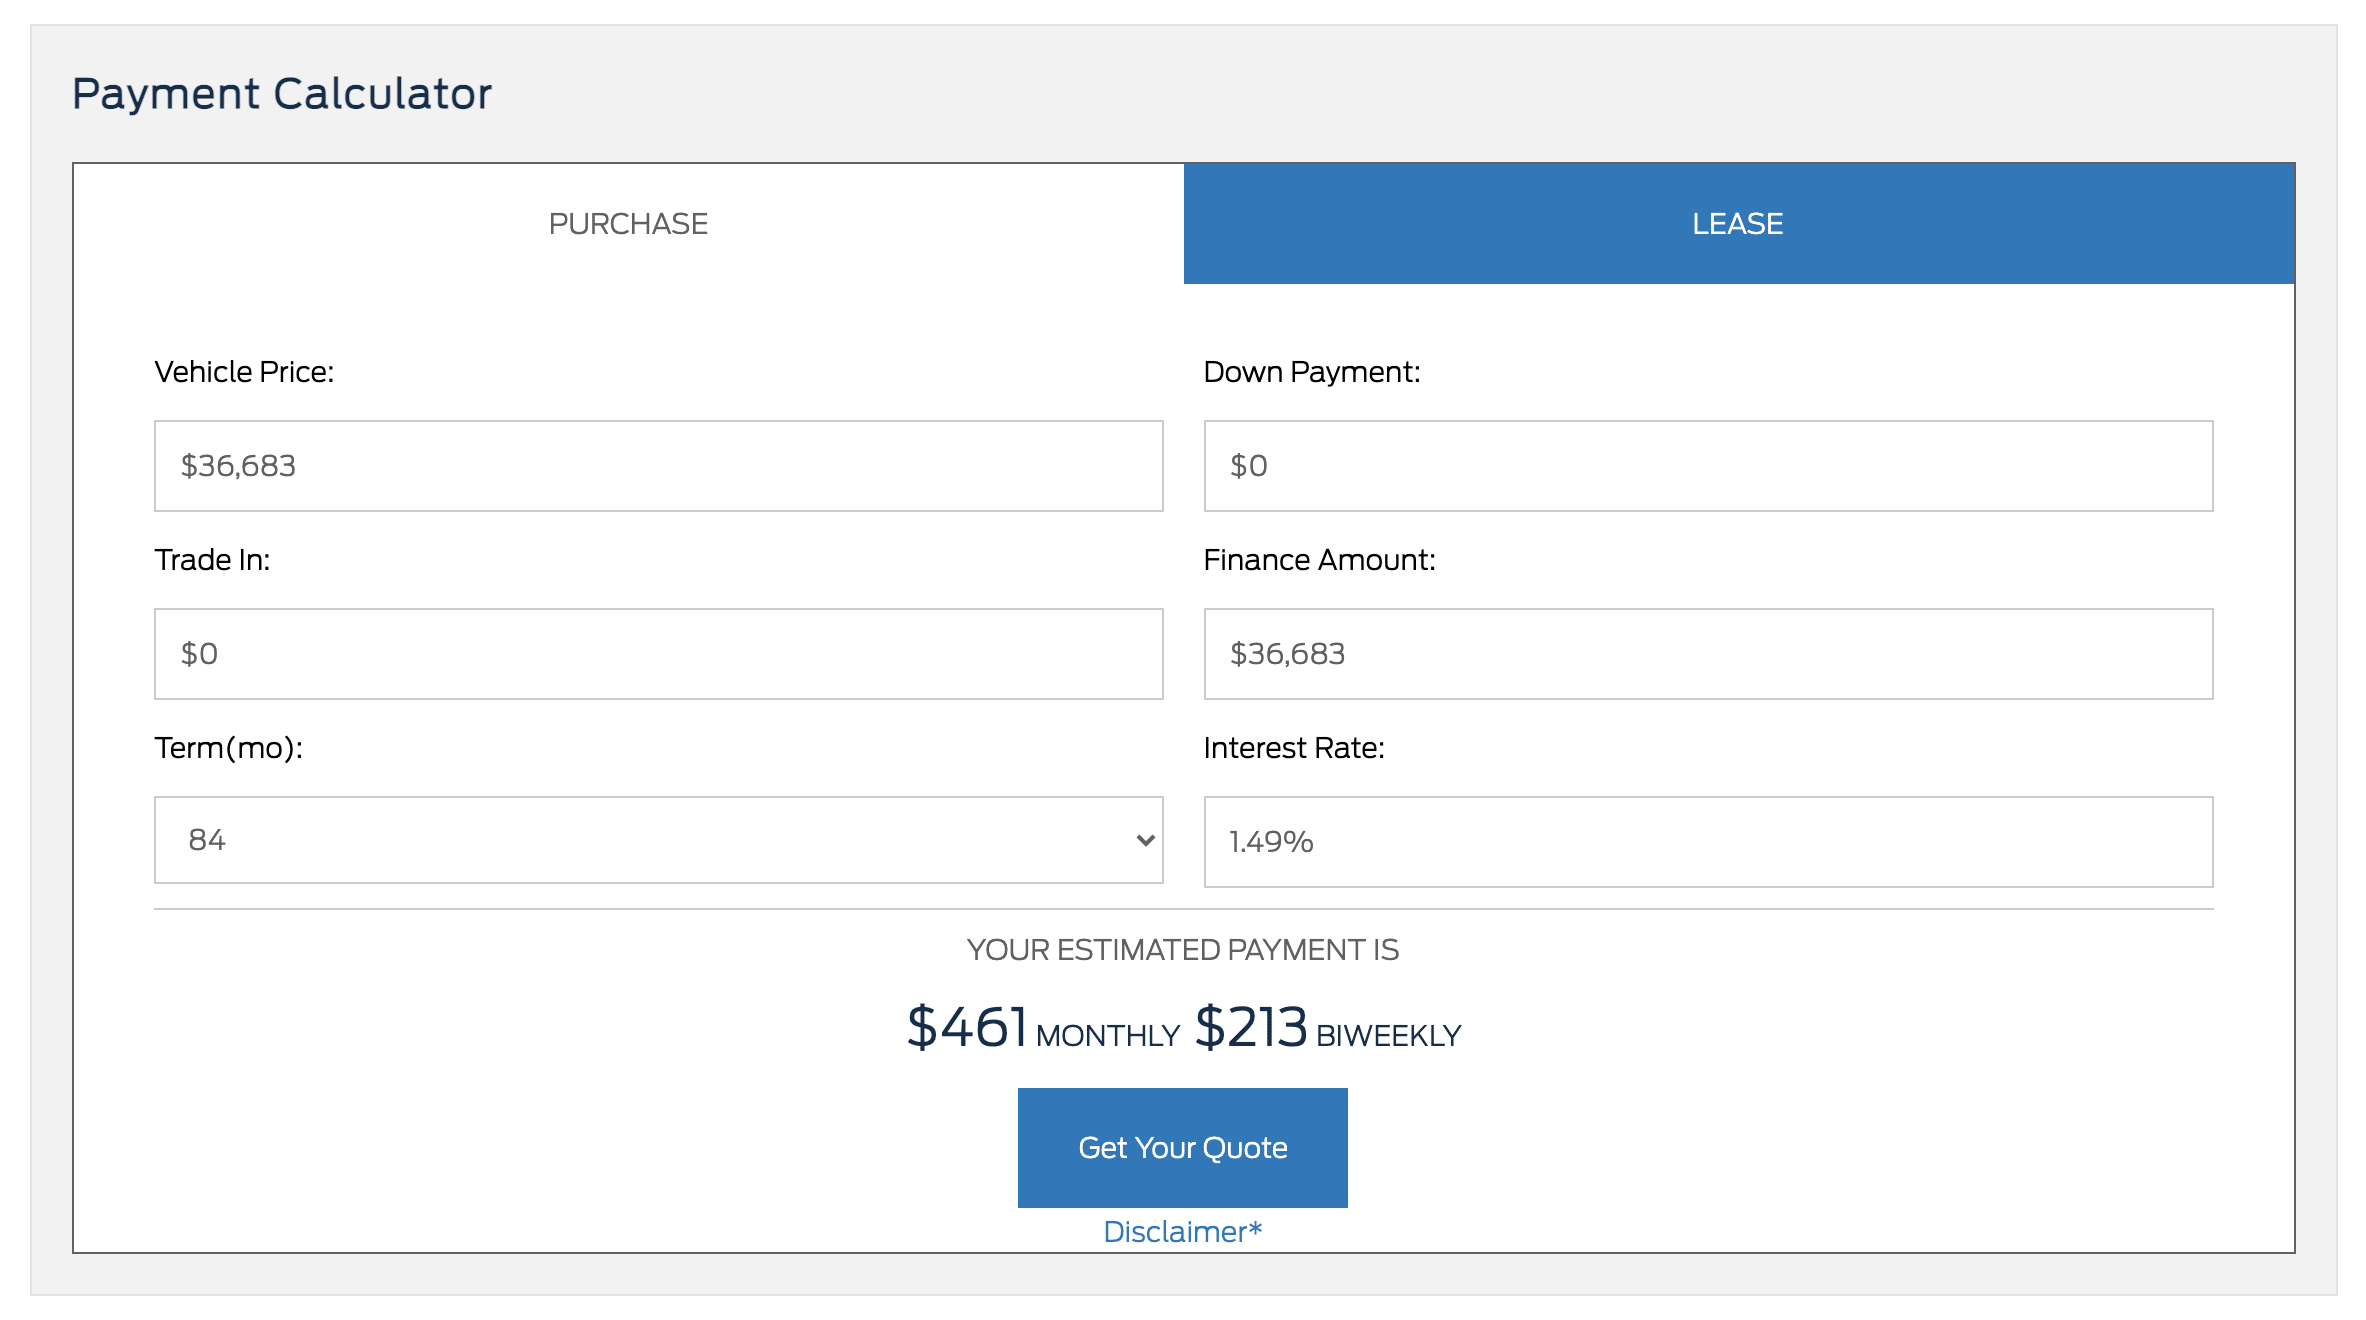 Estimate your payment